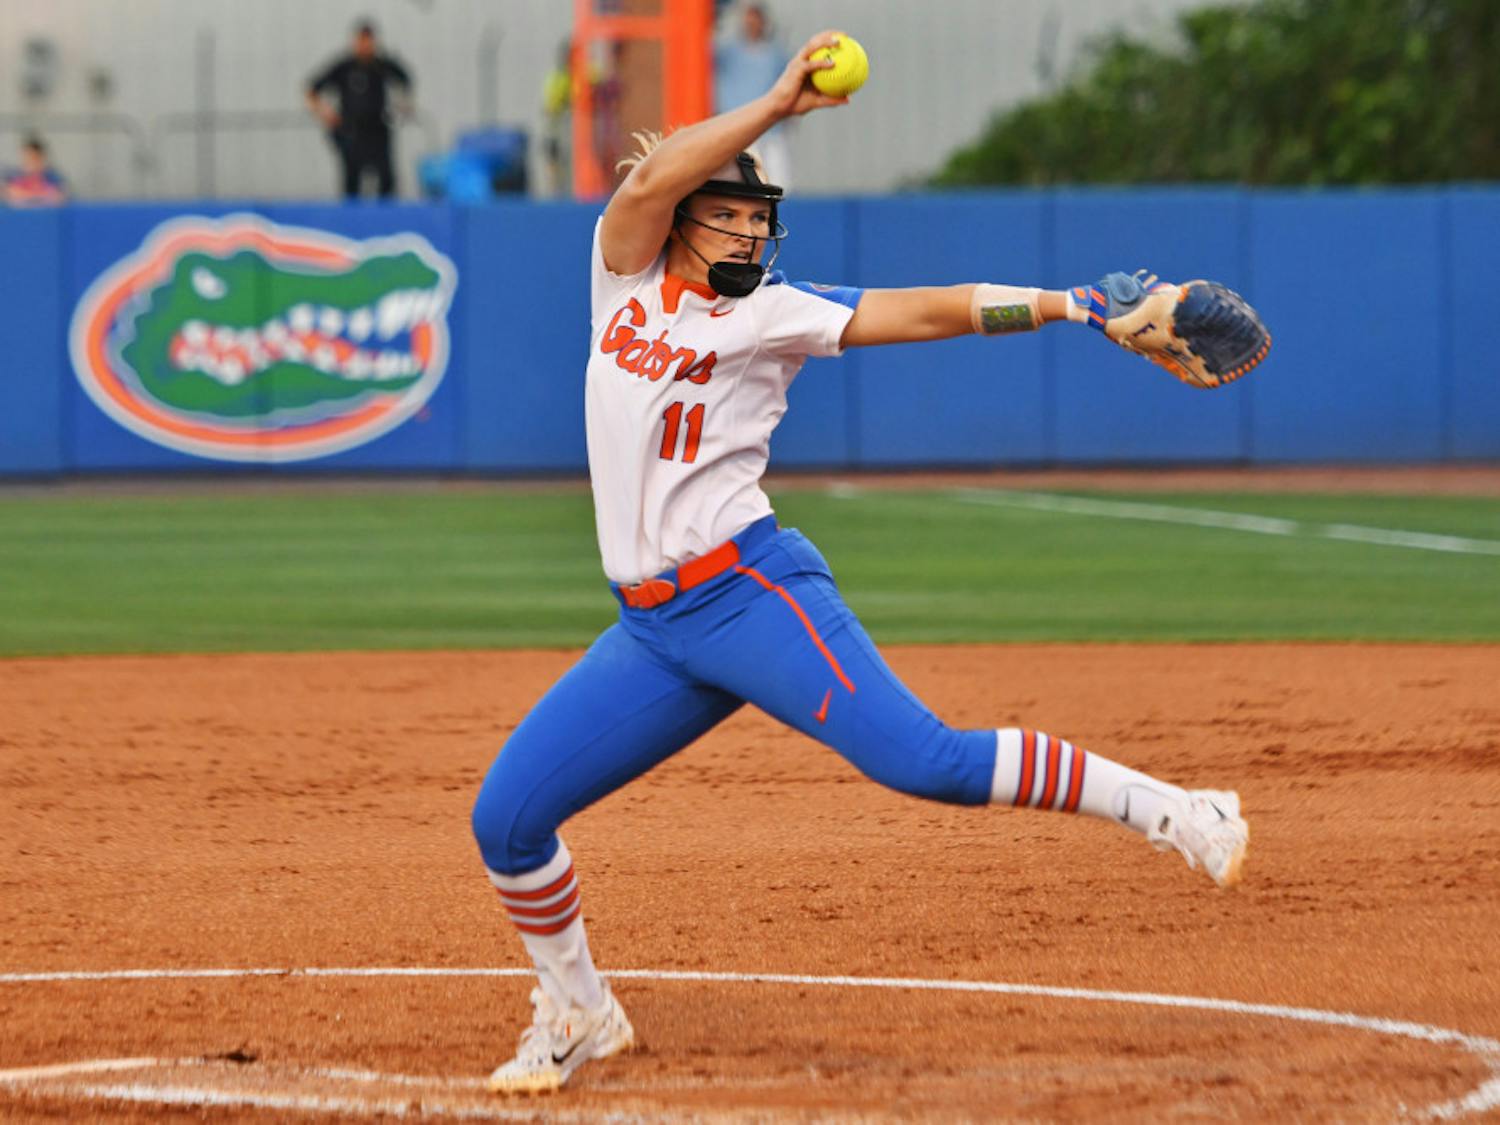 UF pitcher Kelly Barnhill pitches during Florida’s 3-0 loss against Alabama in game one of the NCAA Super Regional on May 25, 2017, at Katie Seashole Pressly Stadium.